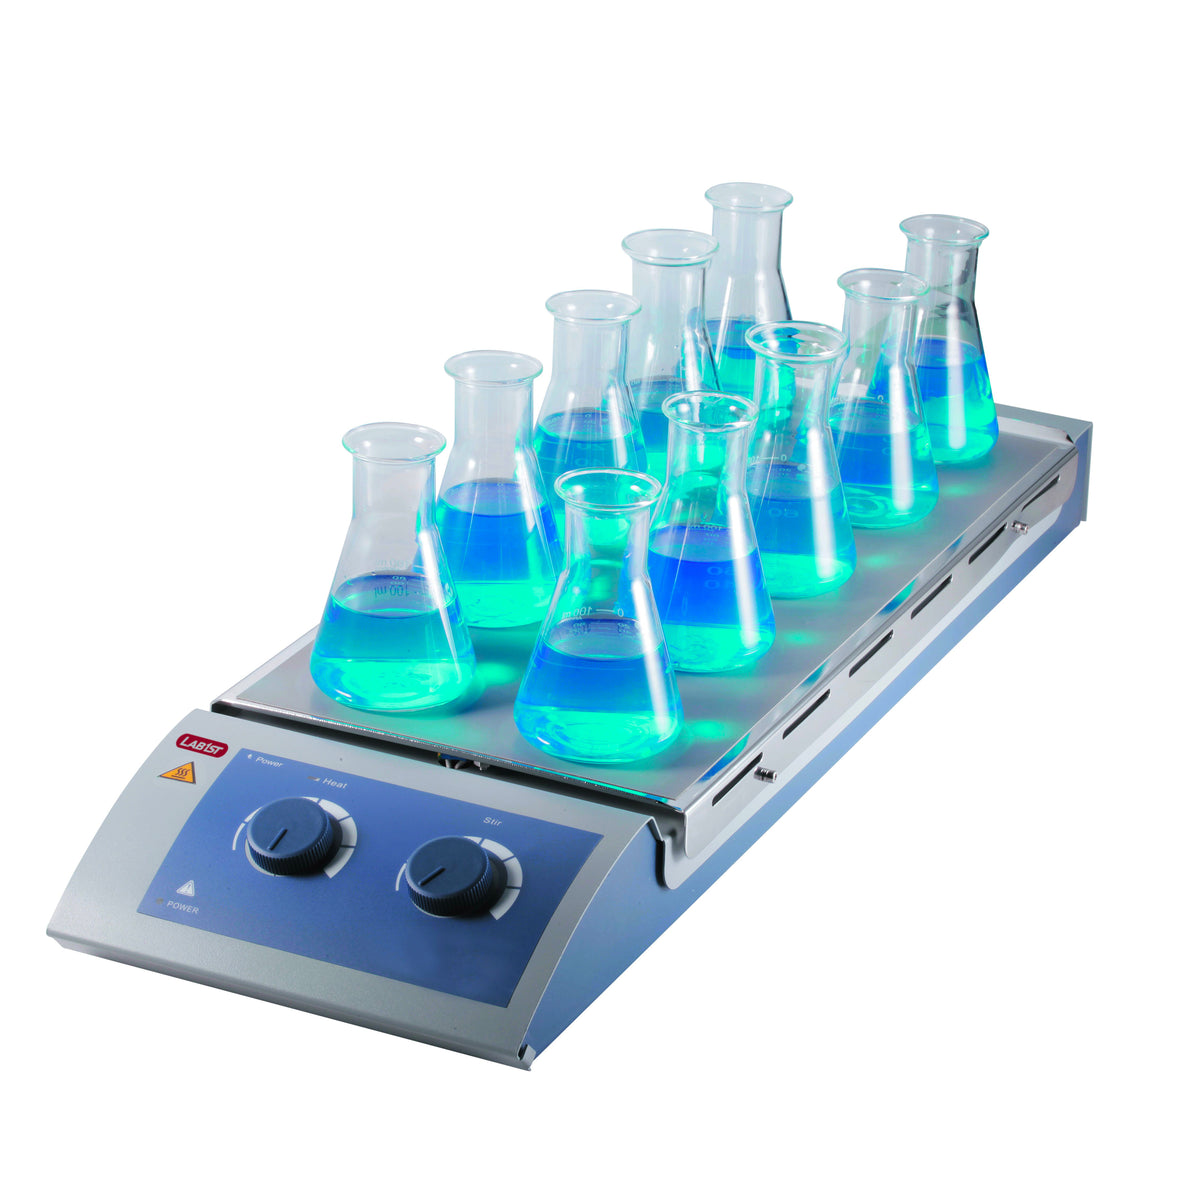 10-Channel Classic Magnetic Stirrer Stainless Steel Plate with Silicone Film